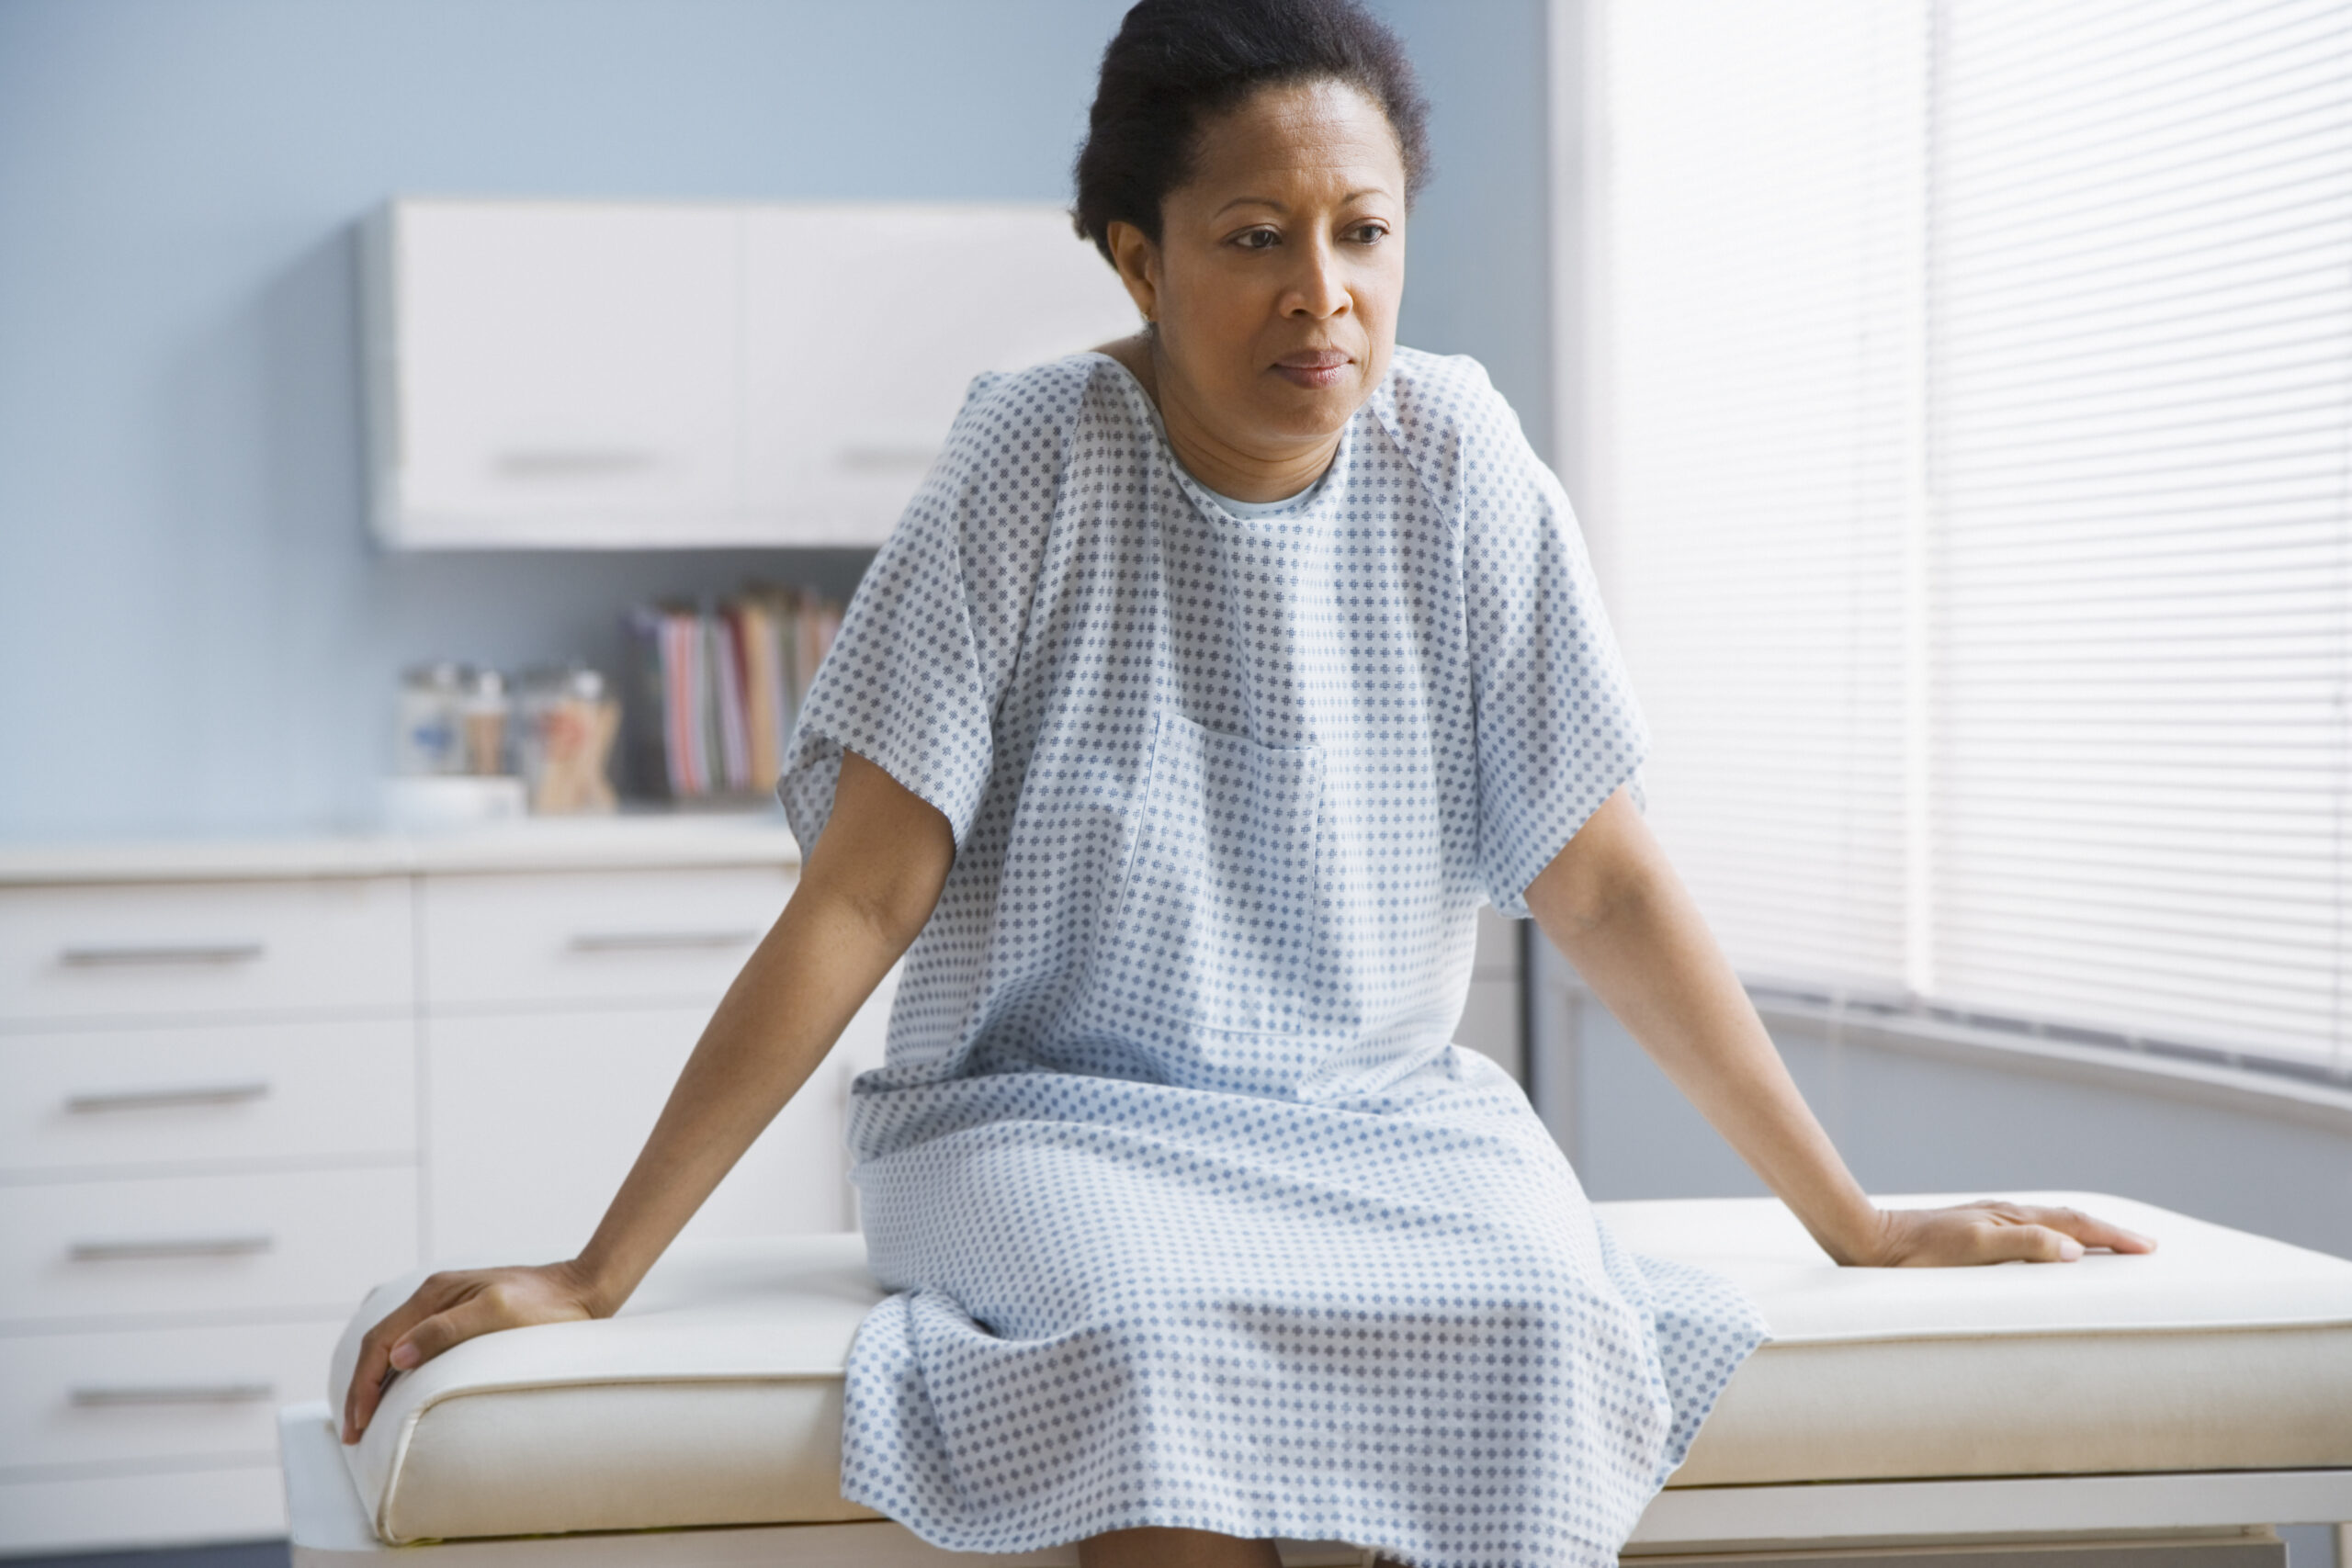 Study Finds Transvaginal Ultrasounds May Be Ineffective for Black Women